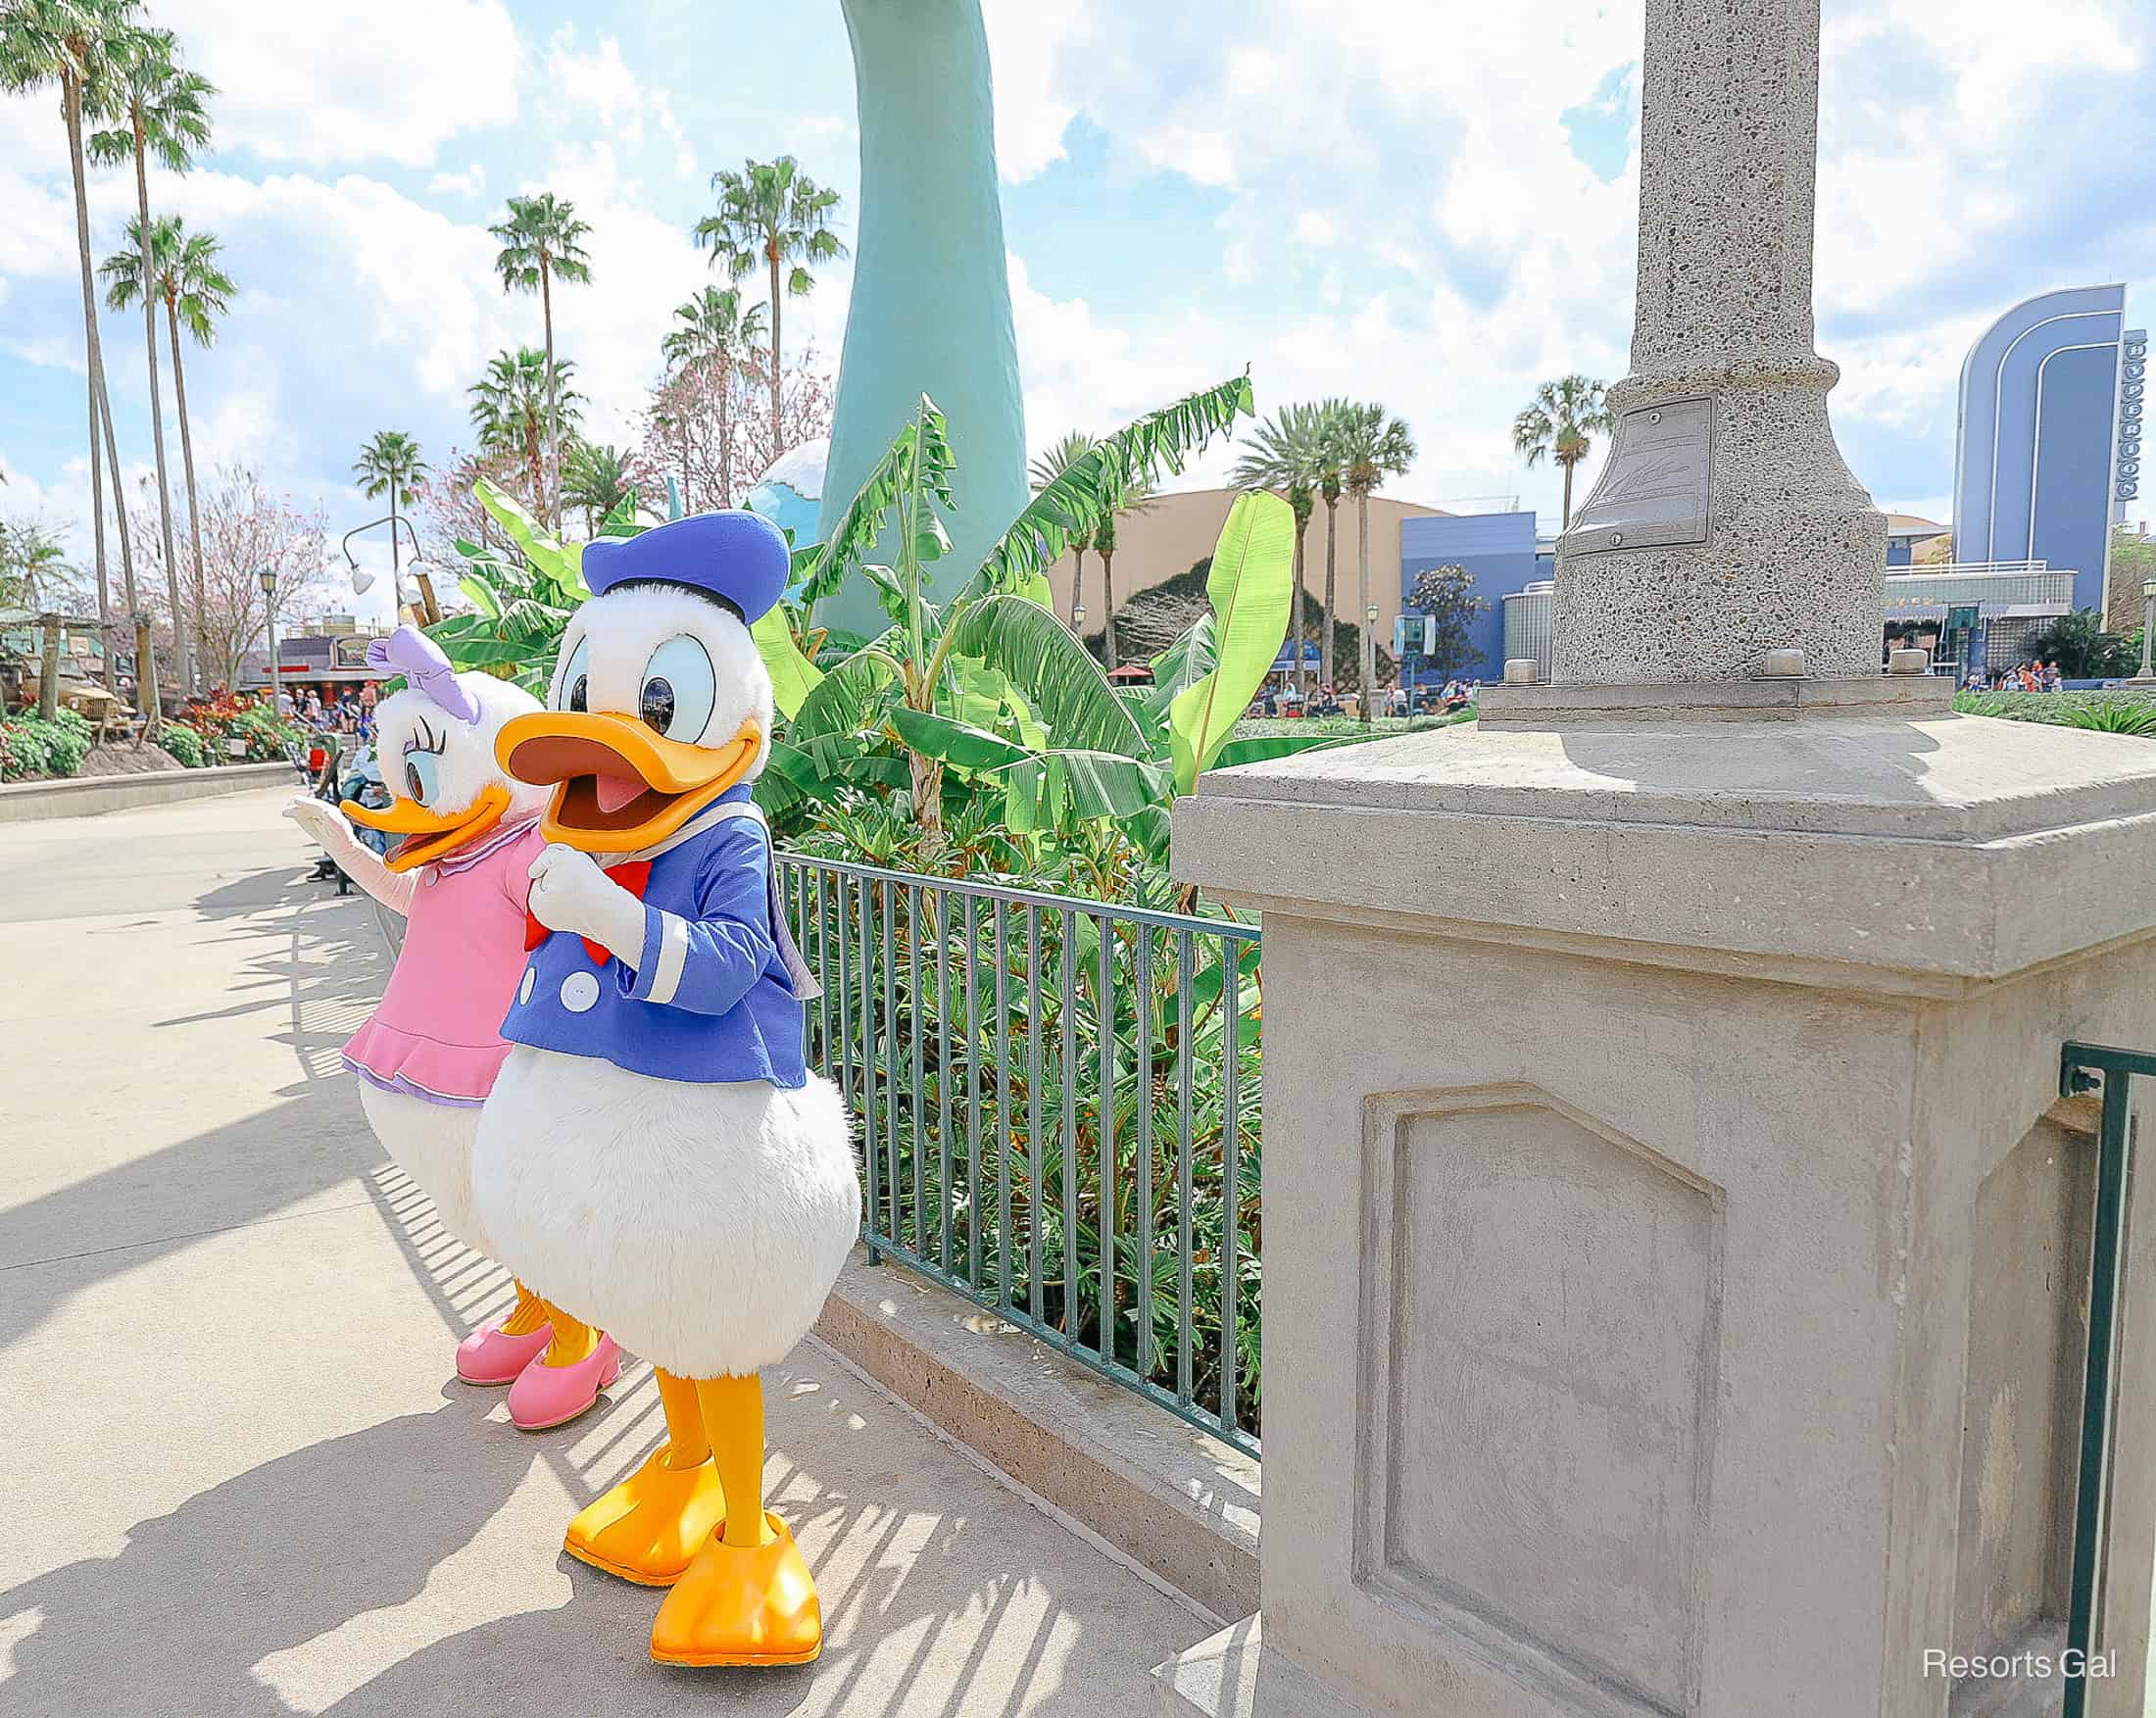 Donald and Daisy Duck talking and waving to guests. 